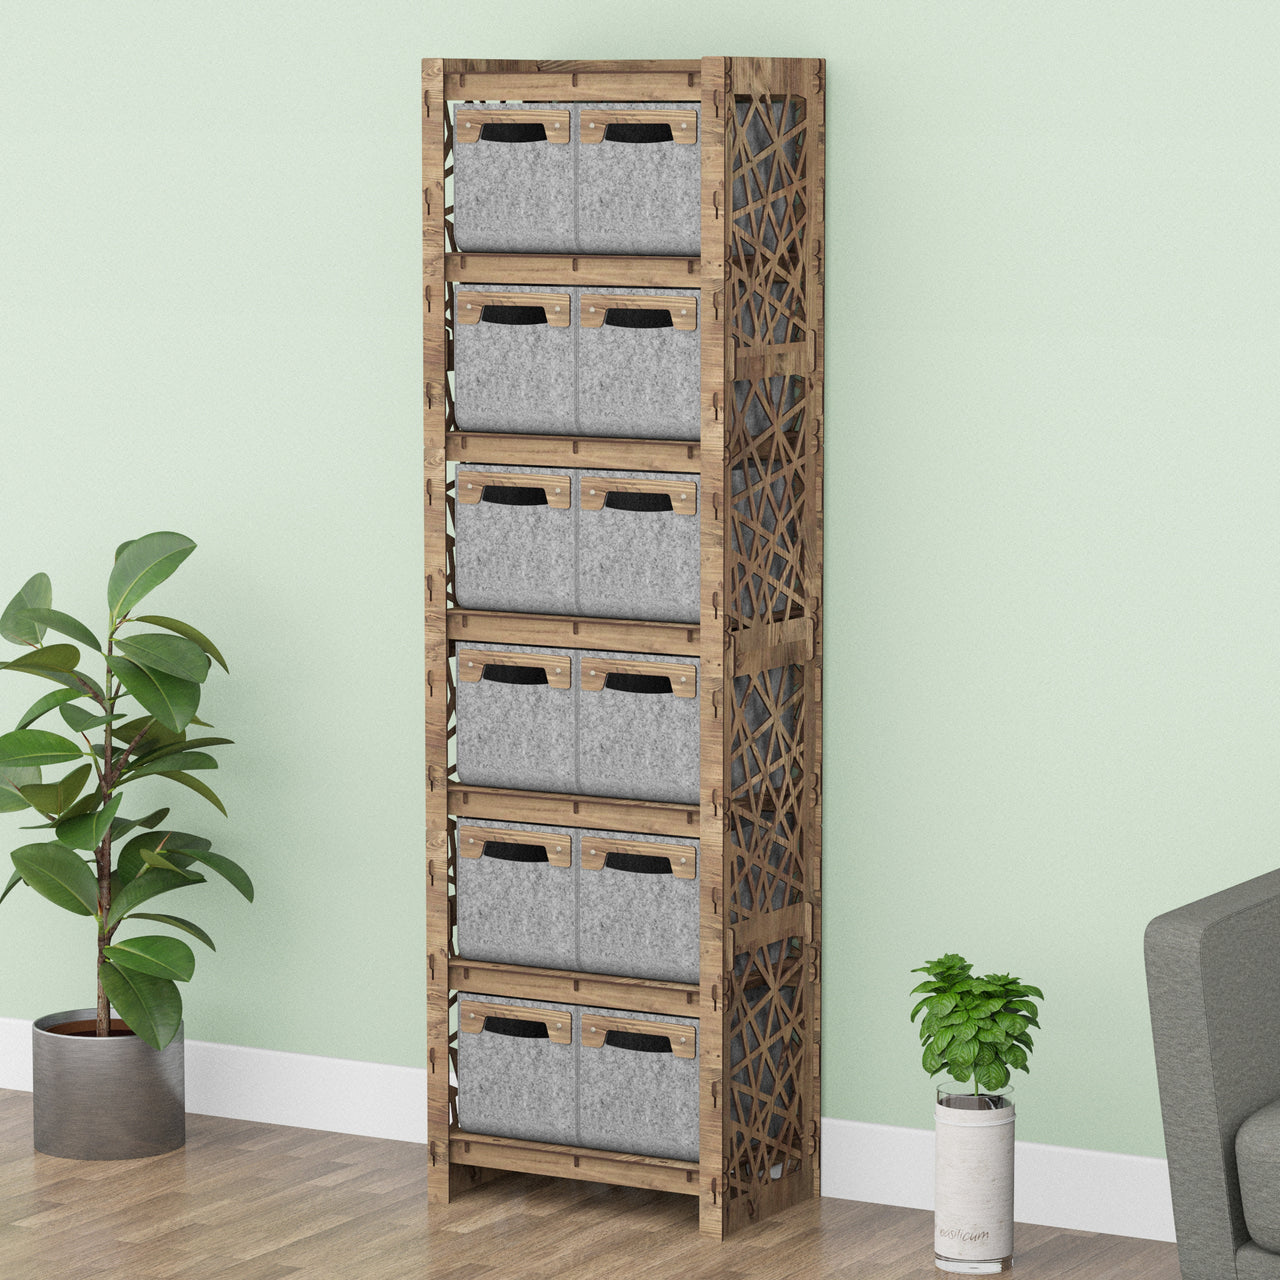 Crystals Tall 12 Drawer Storage Tower [12 SMALL GRAY BINS]